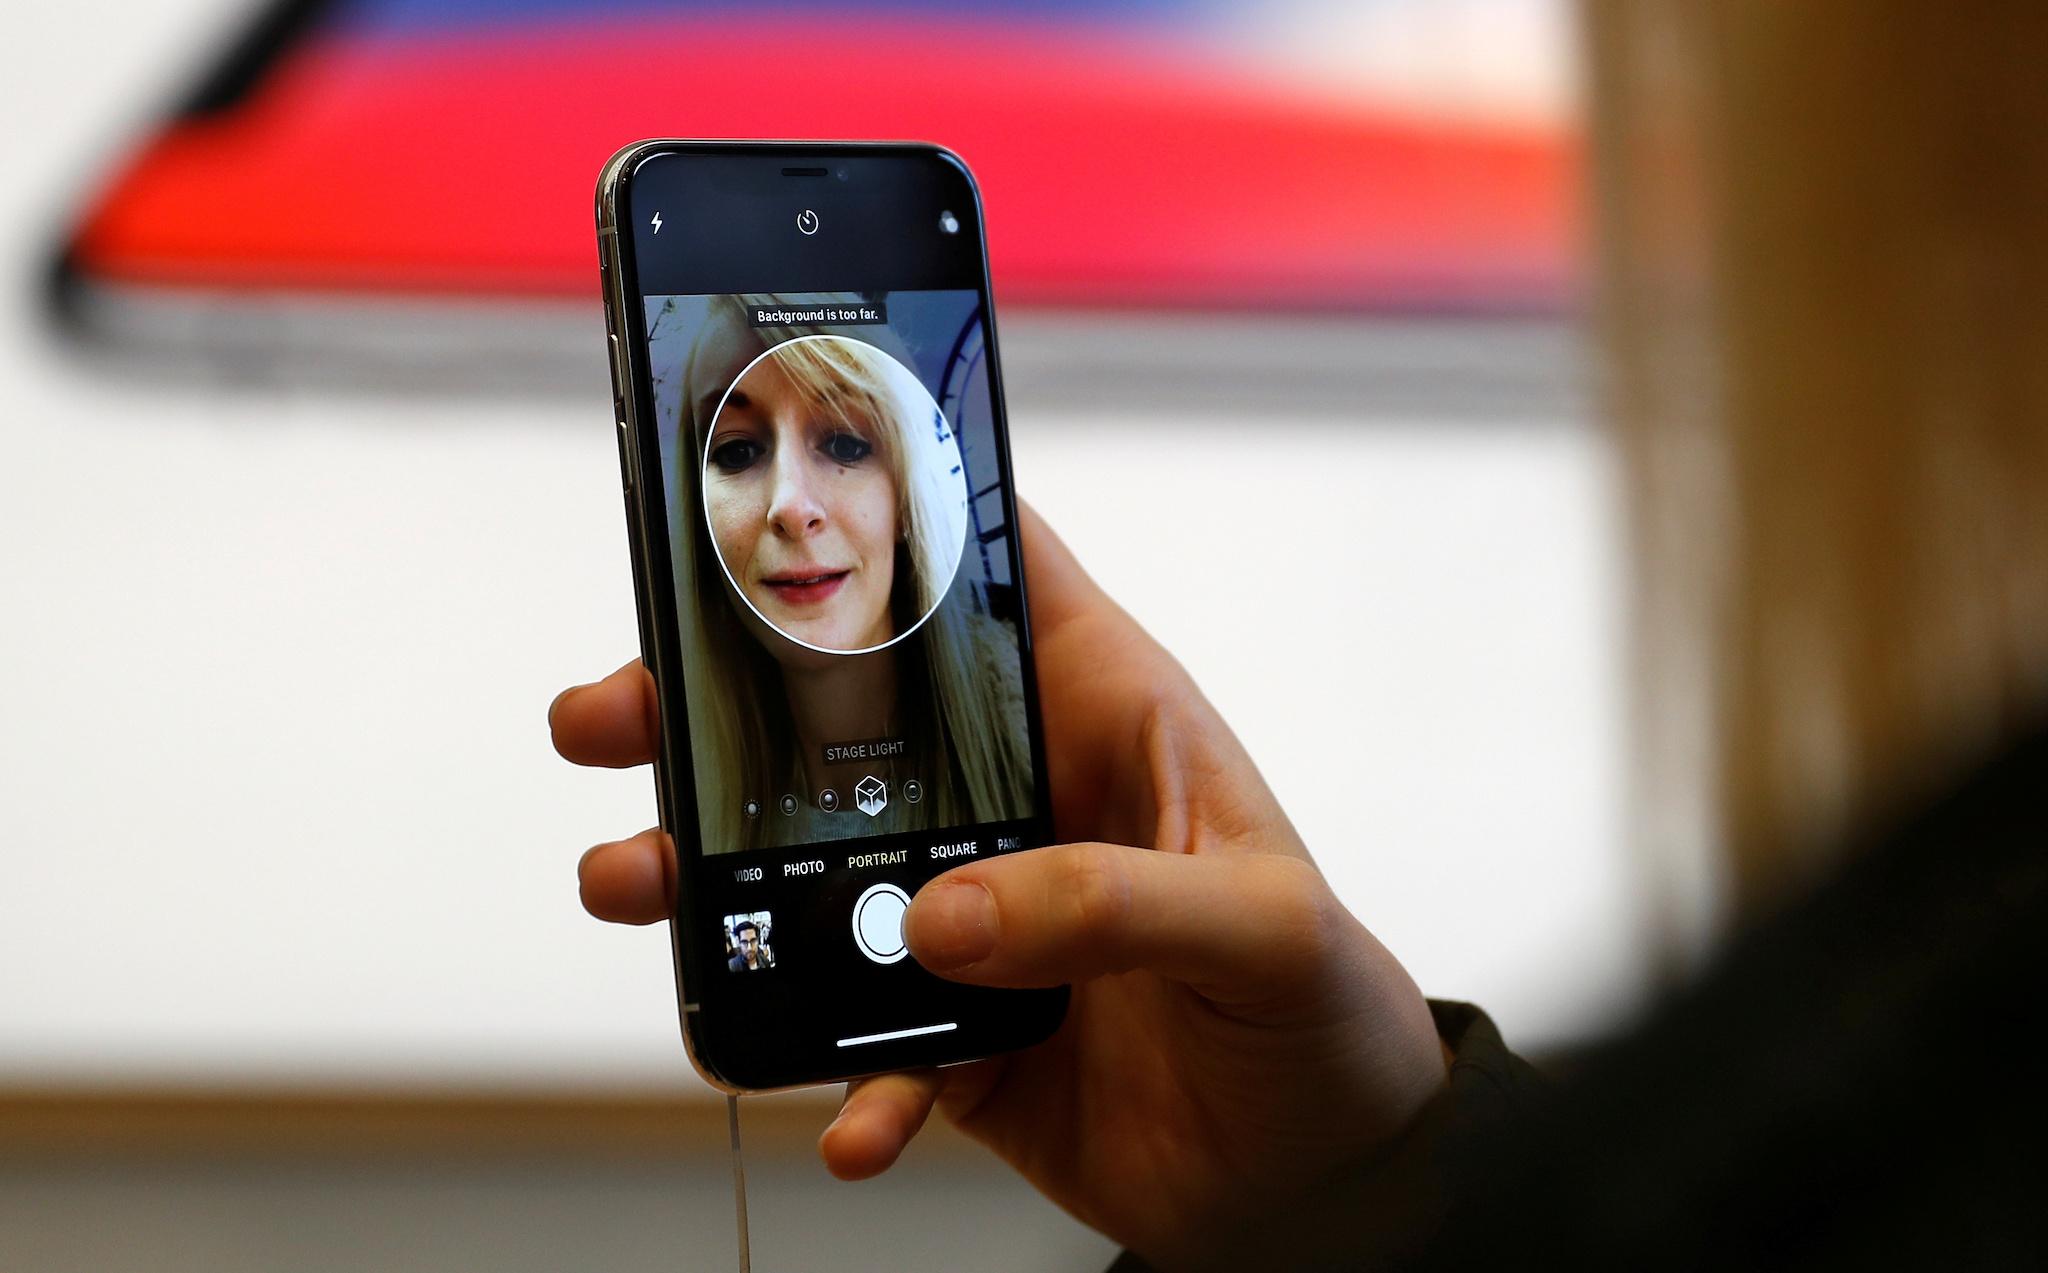 A customer uses the new face-recognition software on the new iPhone X inside the Apple Store in Regents Street in London